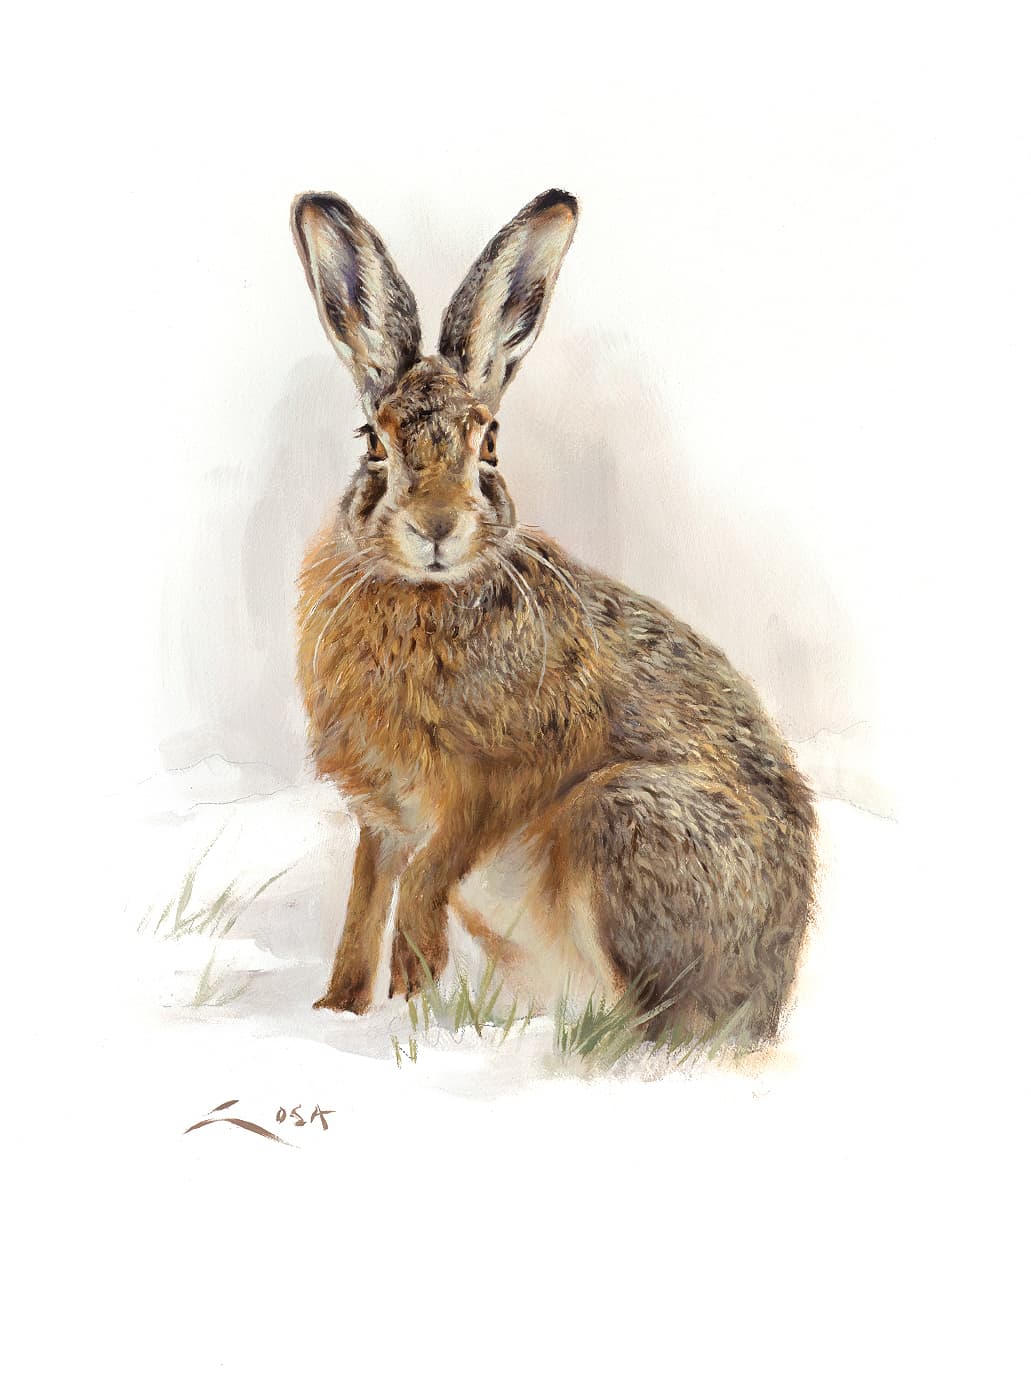 Hare painting in oil